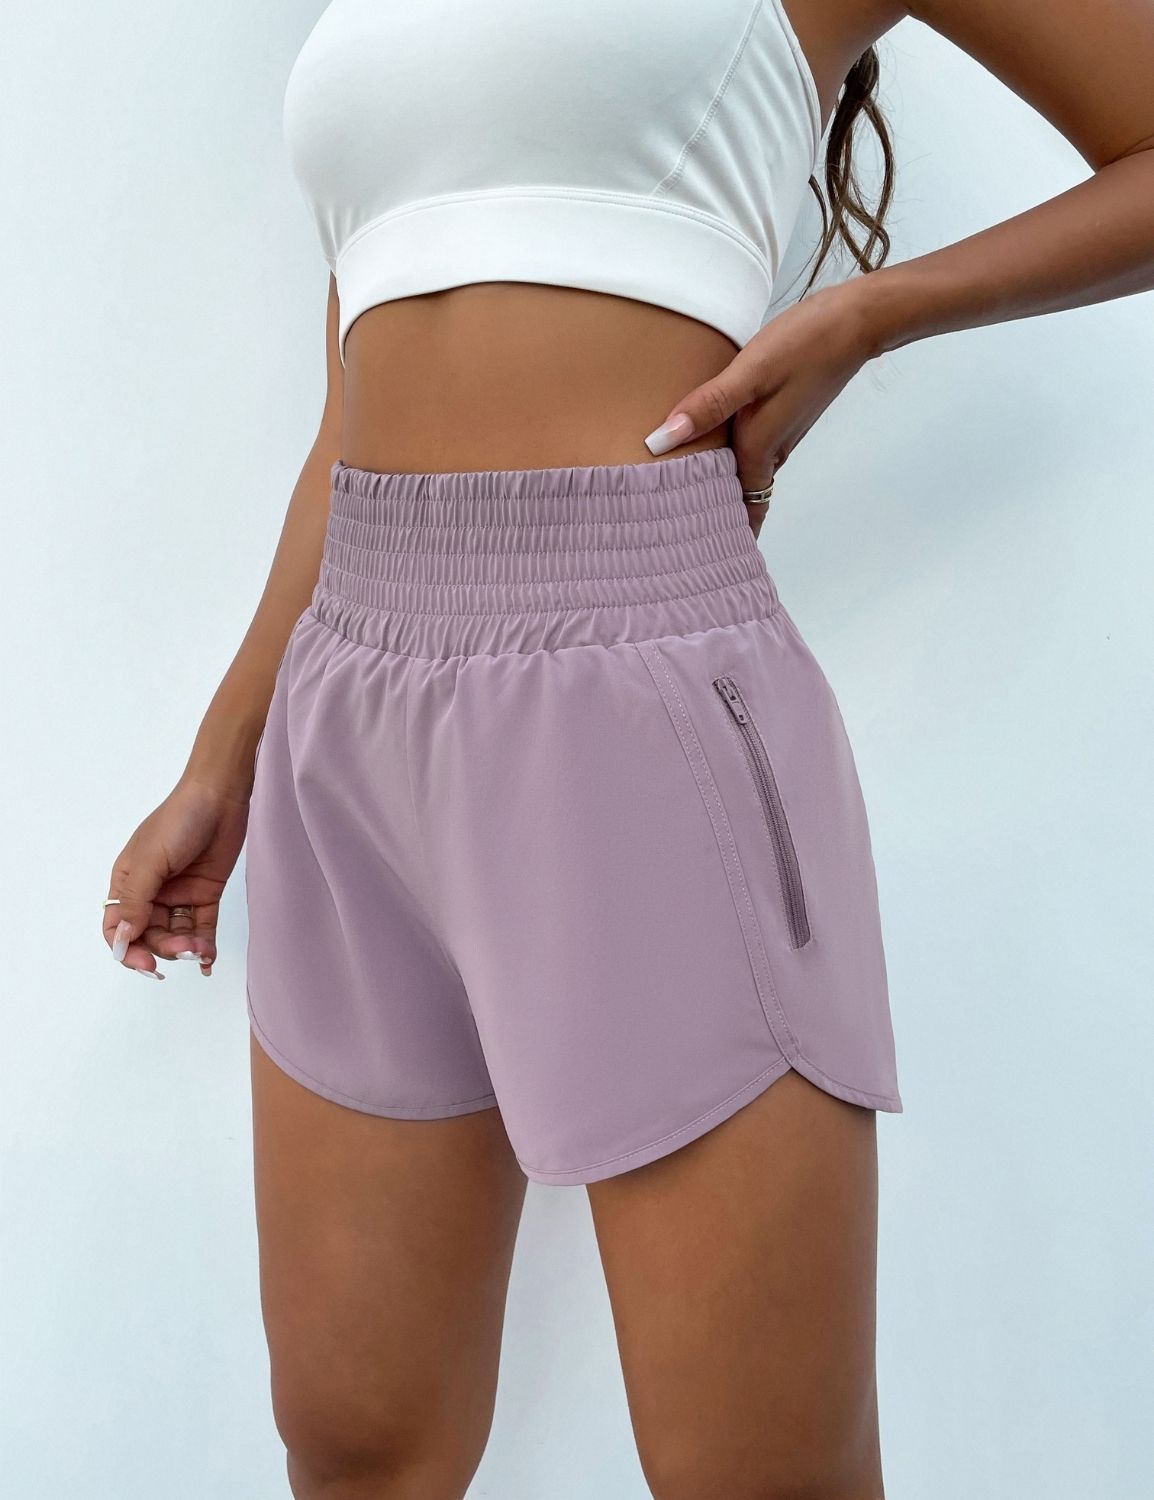 BMJL High Waisted Gym Athletic Running Shorts